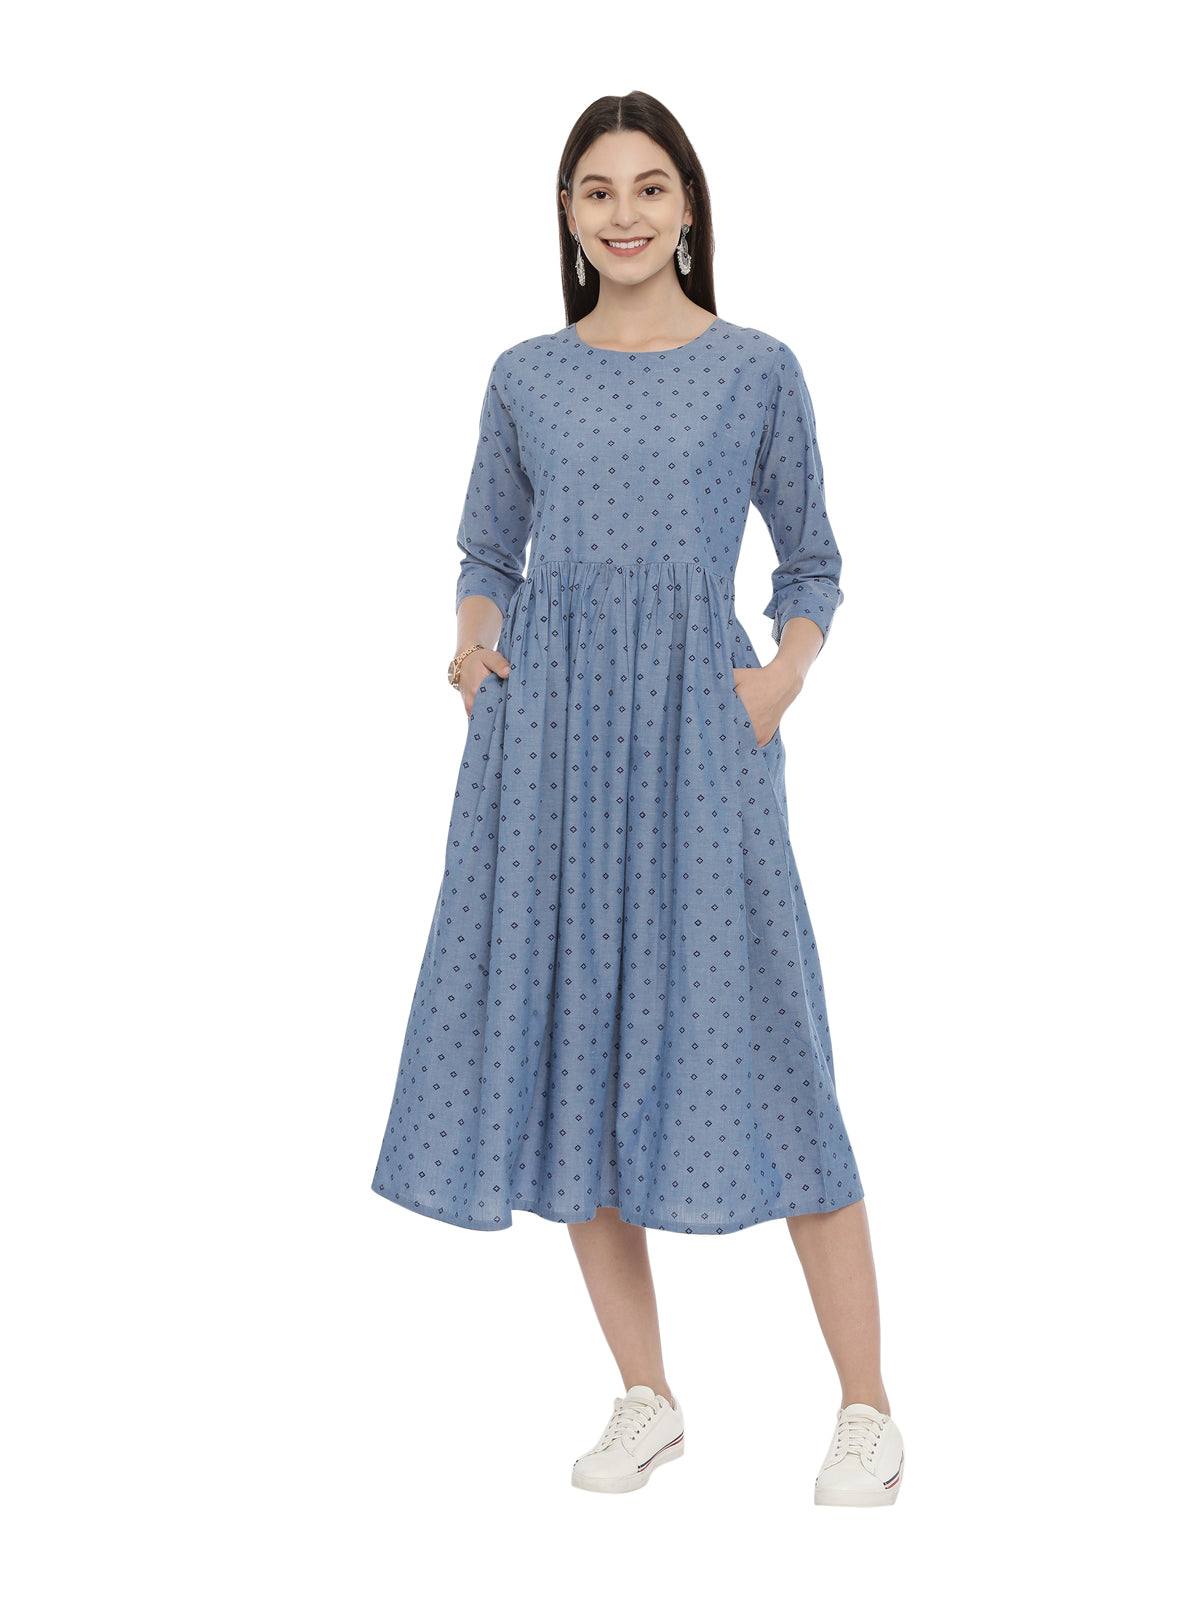 StyleStone Denim Blue Fit And Flare Dress - Single - Buy StyleStone Denim  Blue Fit And Flare Dress - Single Online at Best Prices in India on Snapdeal